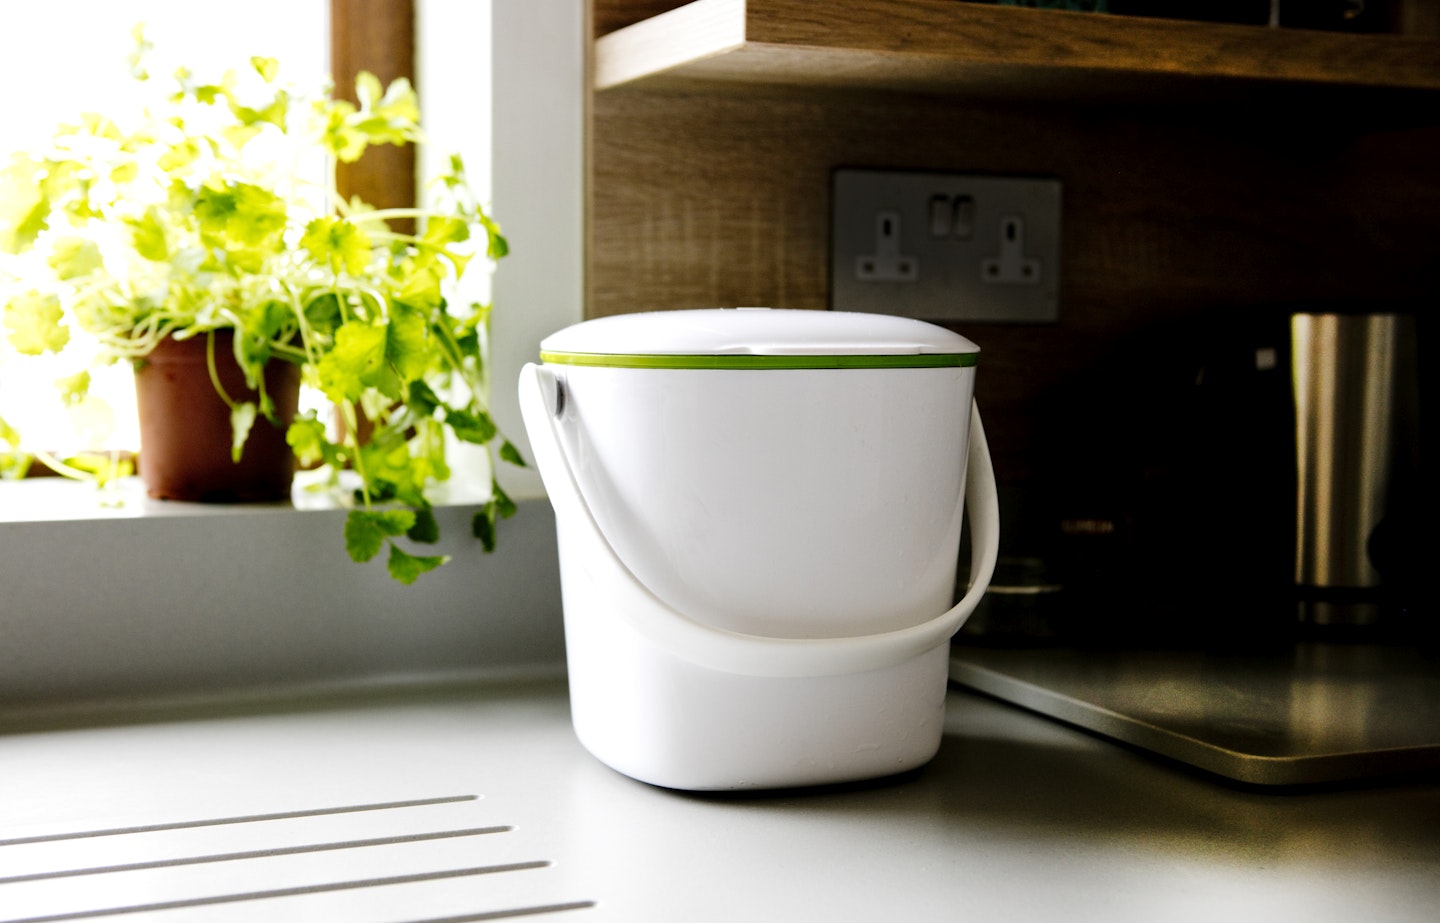 Countertop composting catches on among apartment-dwellers